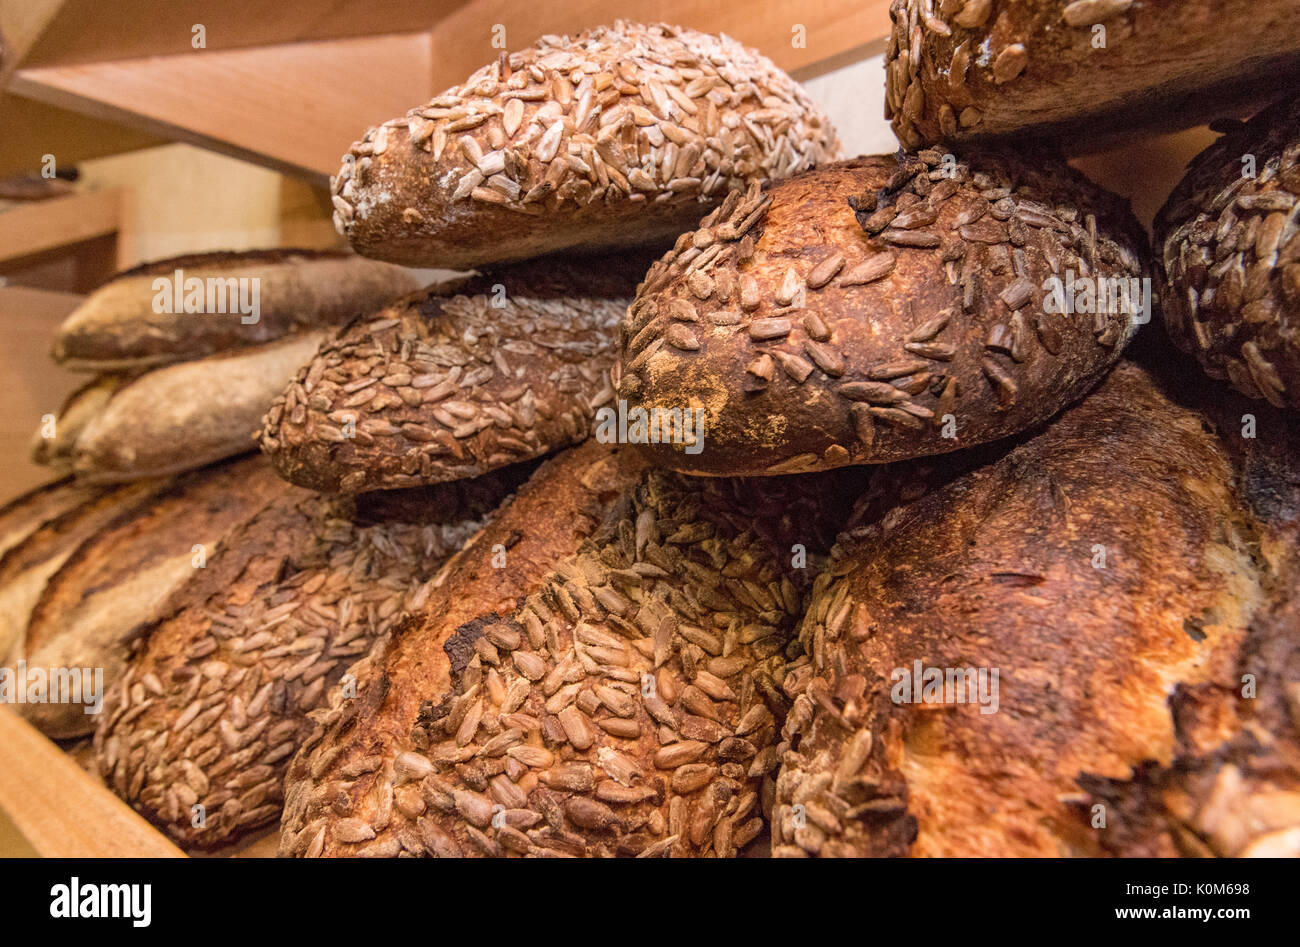 Freshly baked Sourdough breads in a bakery in Sydney, Australia in the early morning before opening time Stock Photo